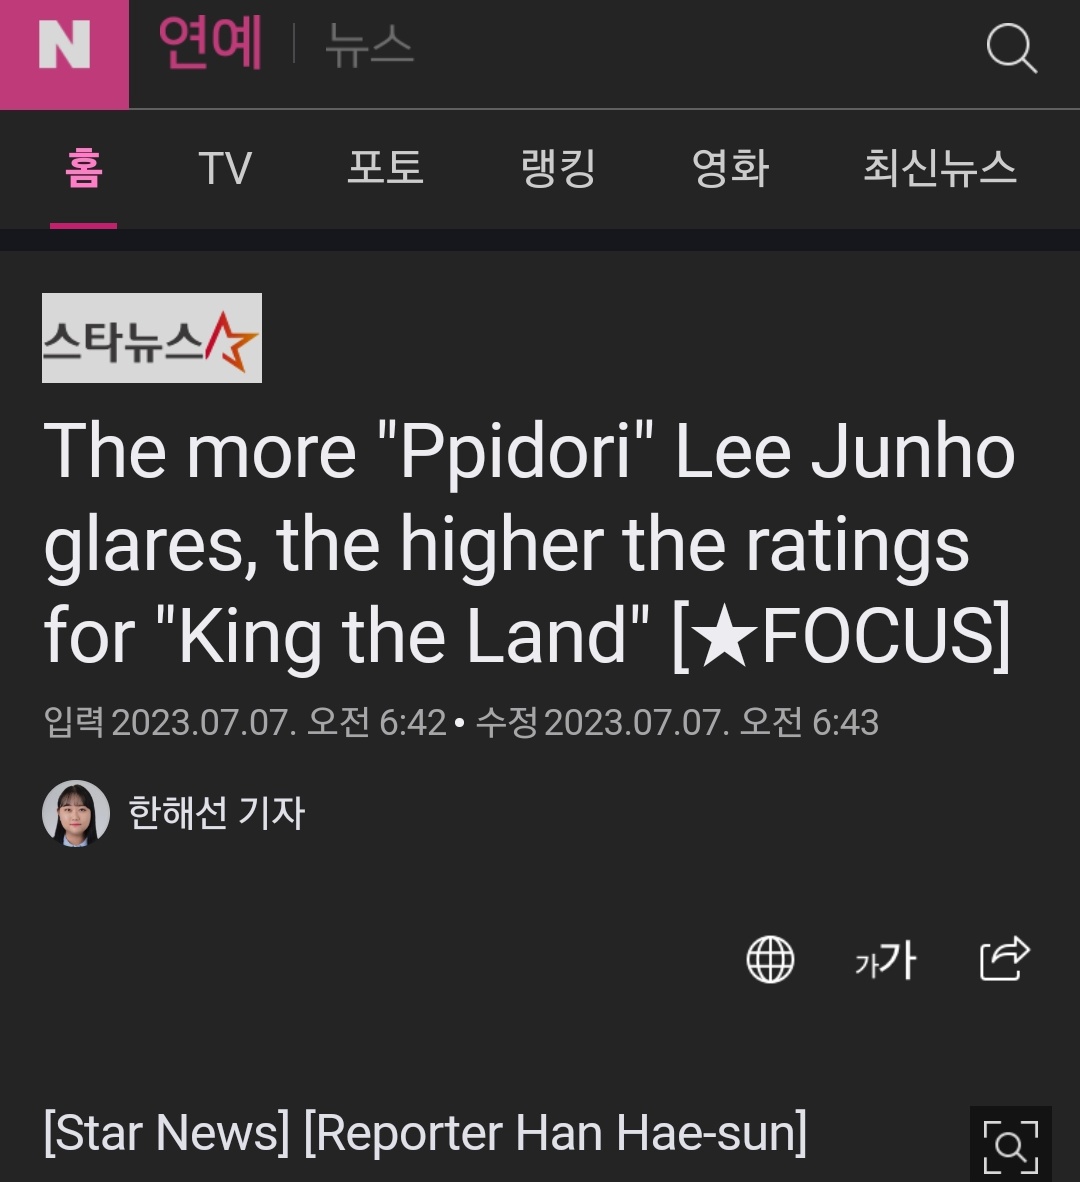 KingtheLand realizing its popularity at home and abroad with a frightning mommentum.According to a survey released by Fundex, the official platform service of GoodData Corporation, Kcontent comptitivnss analysis agency, its poplarty score rose 58.8%compared to last week
#LEEJUNHO